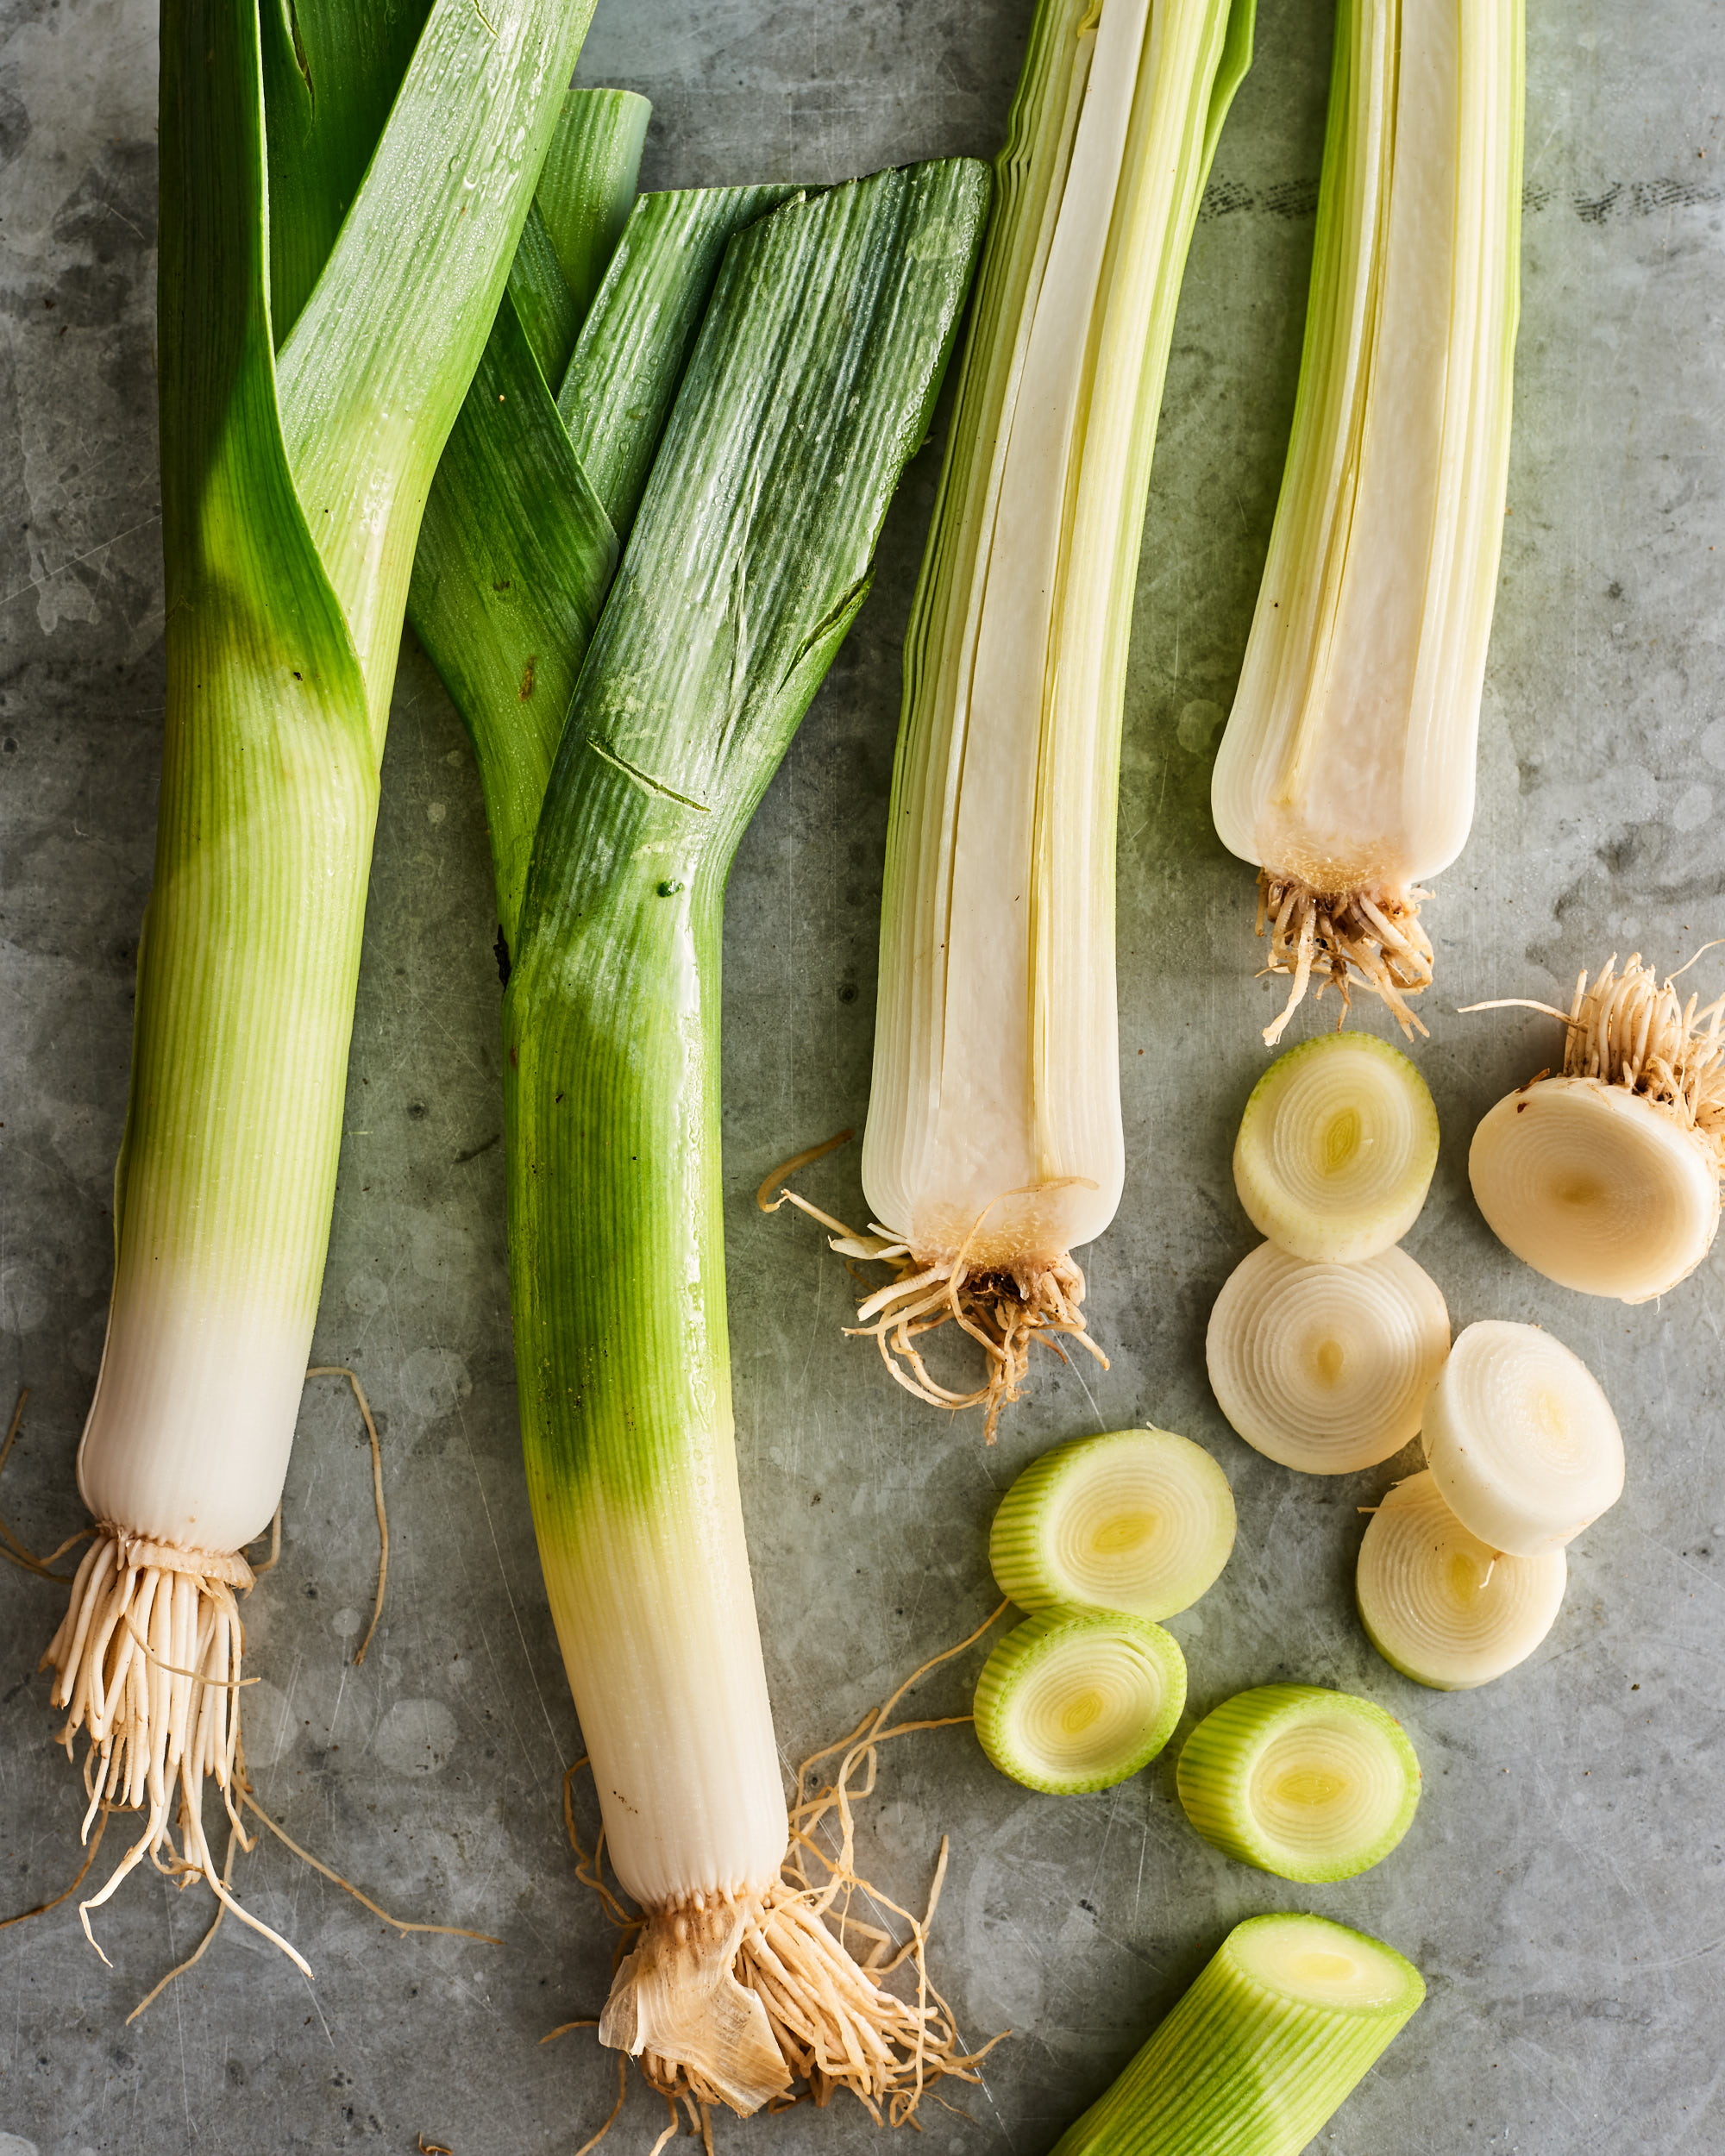 Albums 101+ Images show me a picture of a leek Completed